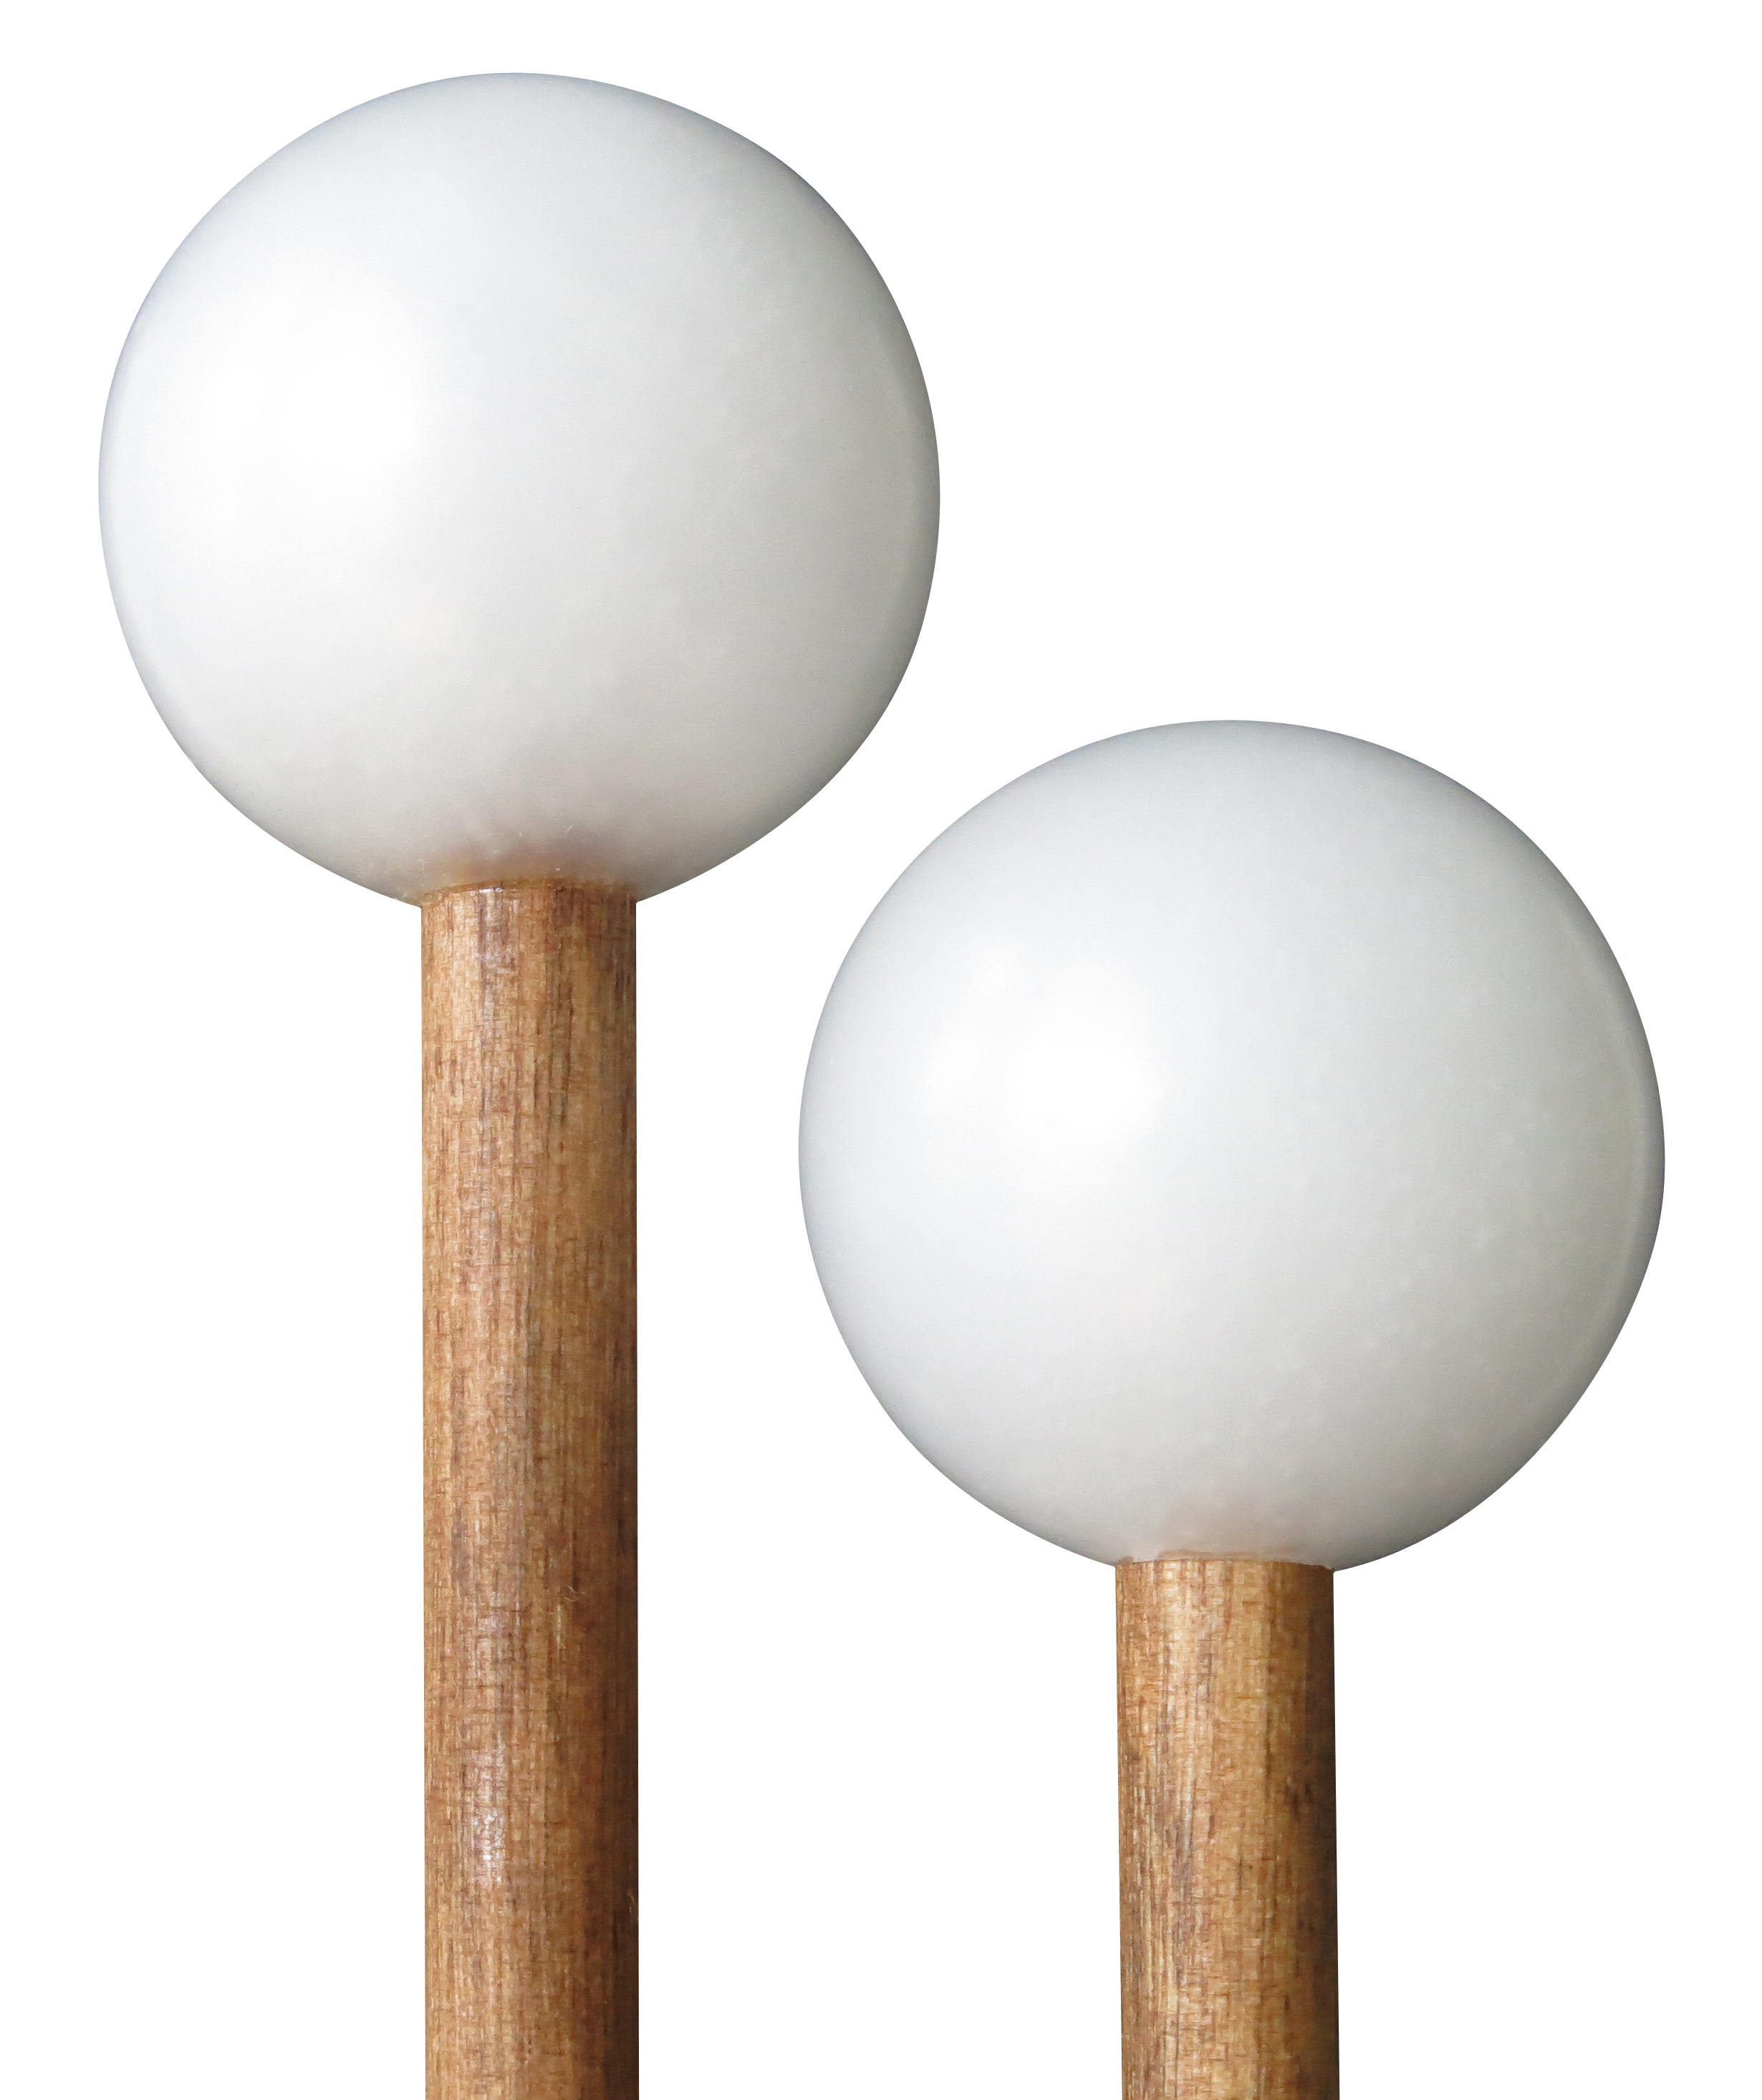 T2HP and Bells MADE IN U.S.A Timber Drum Co Xylophone Pair of Hard Polymer Mallets for Energy Chime Wood Block 